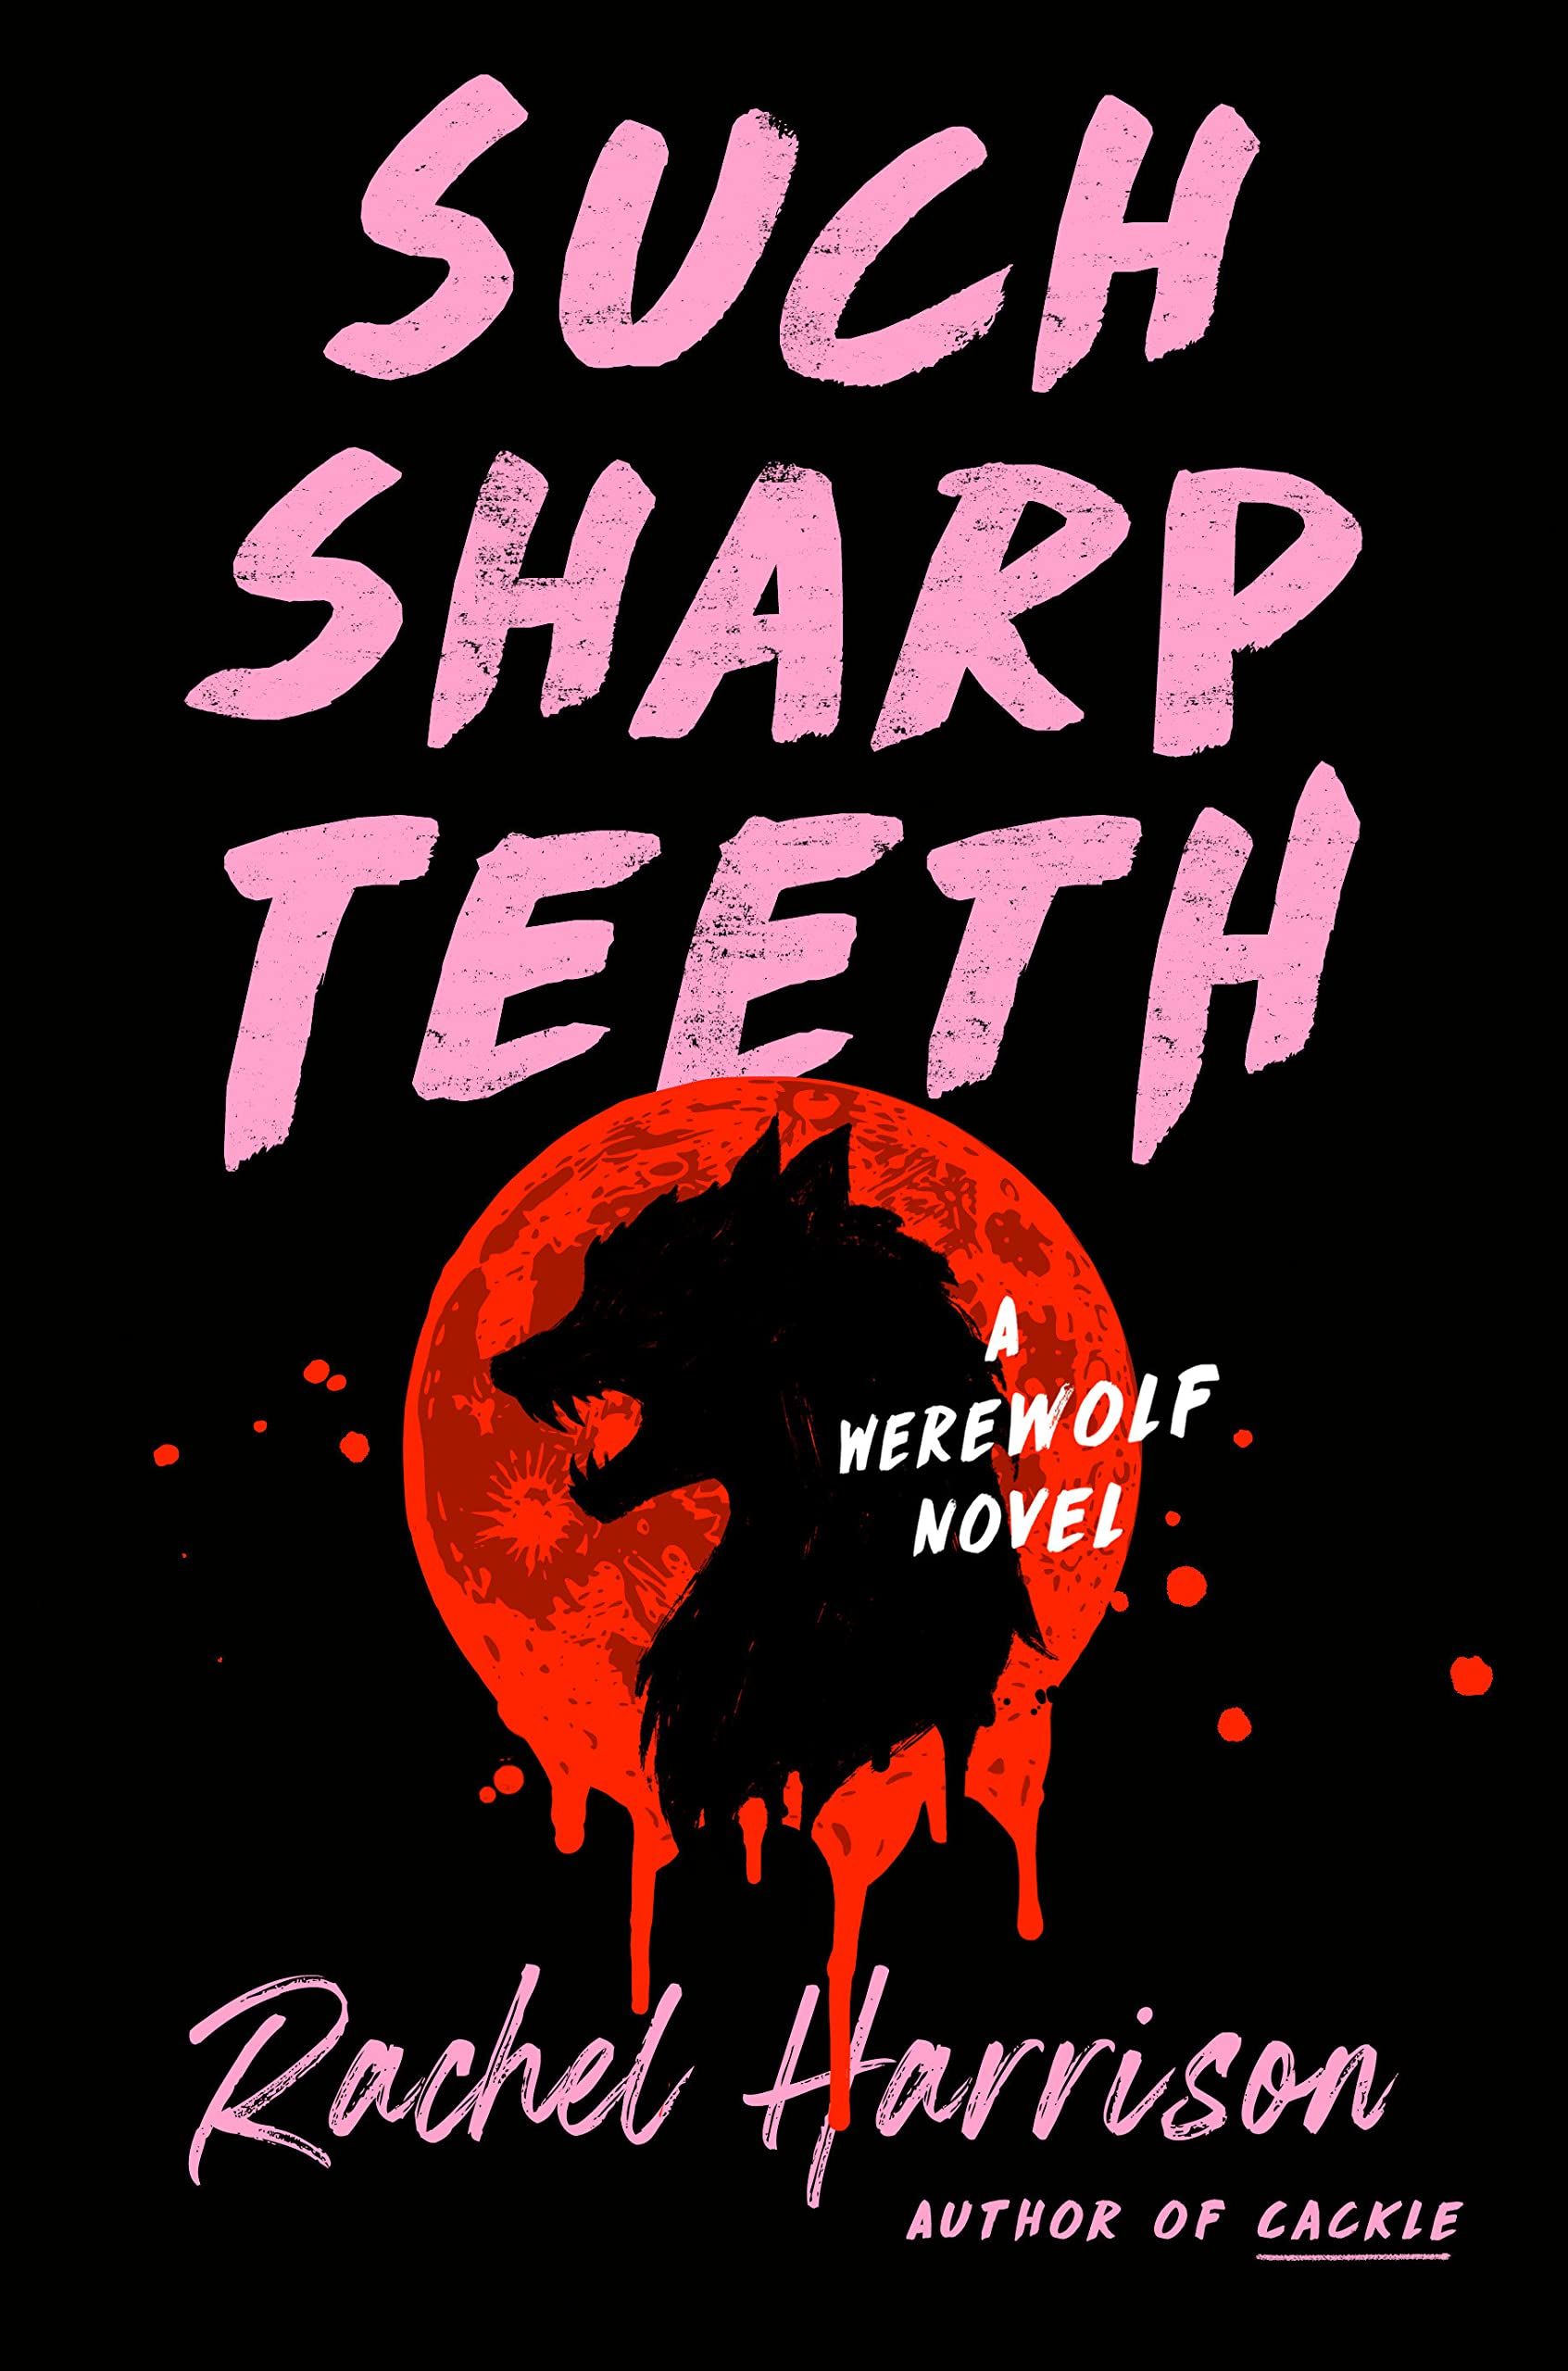 Such Sharp Teeth by Rachel Harrison - book cover - black silhouette of a werewolf head against a blood red moon, set upon a black background and with pale pink text